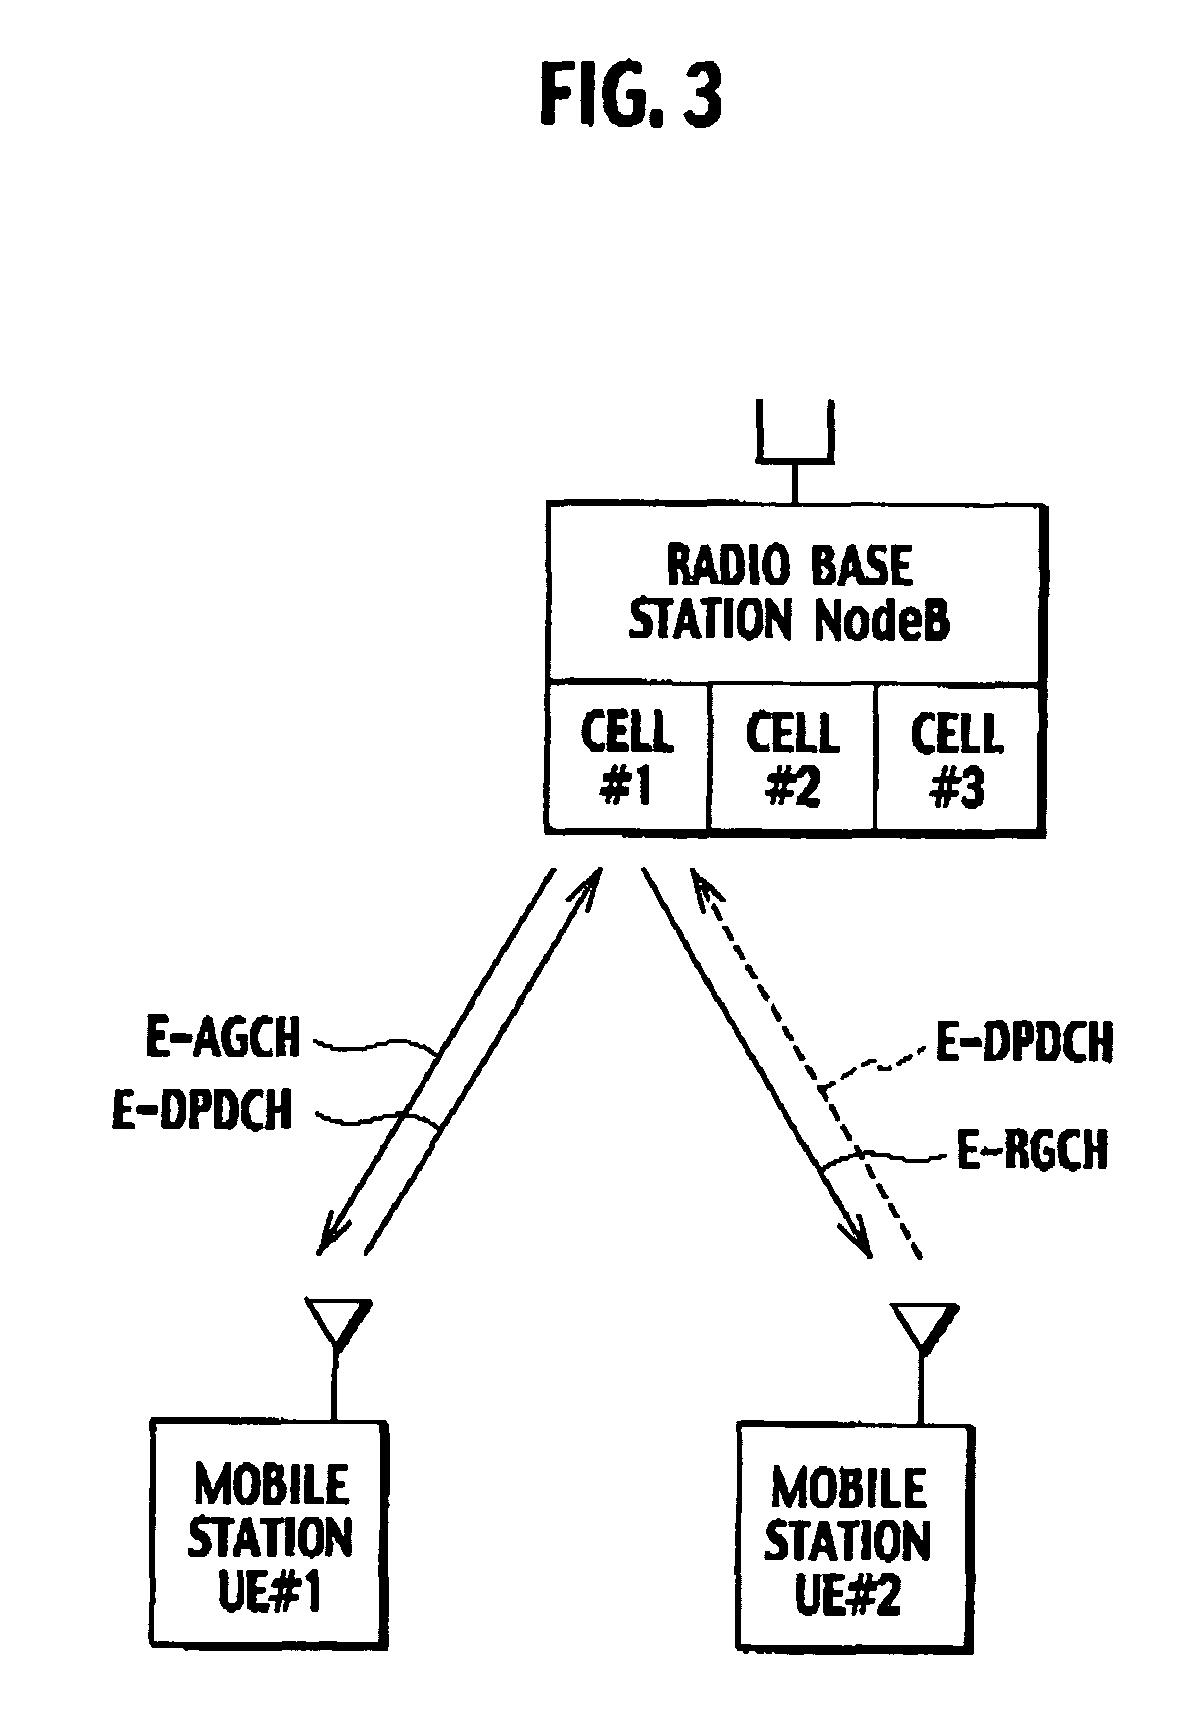 Transmission rate control method, mobile station, radio base station, and radio network controller